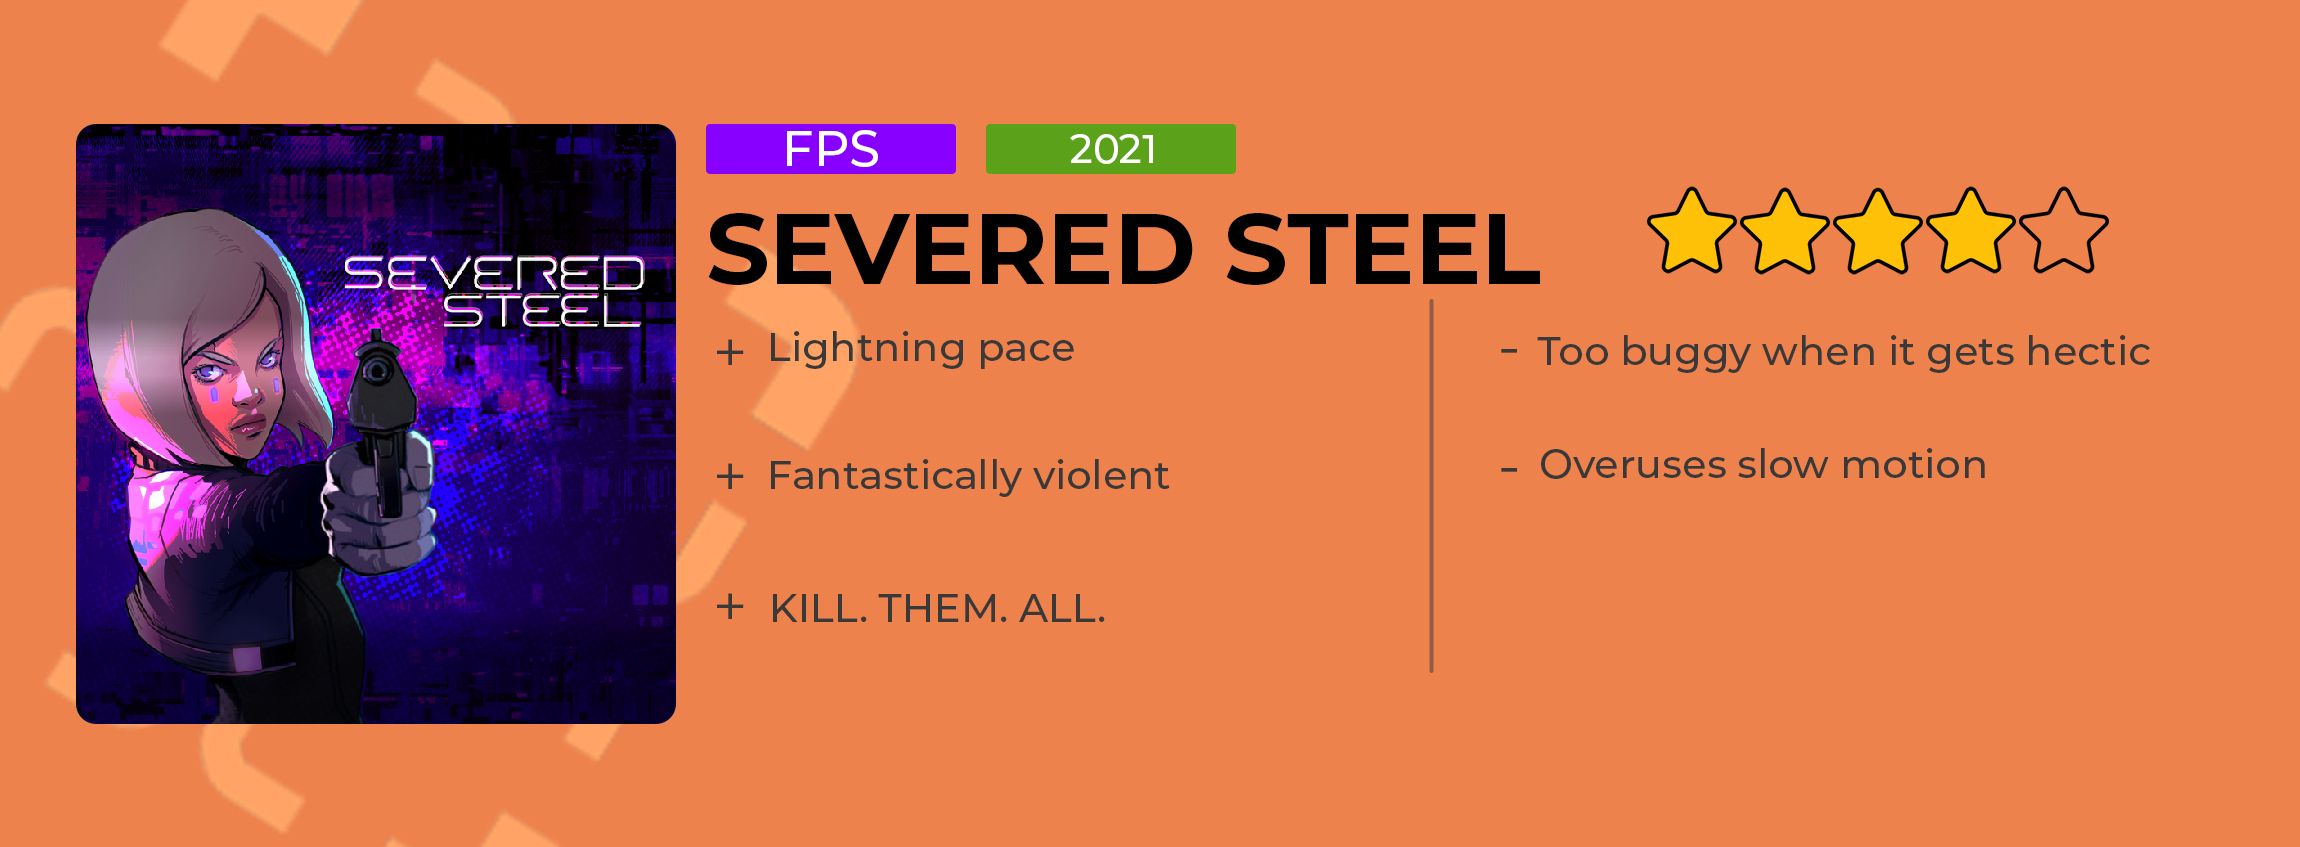 Severed Steel Review Card